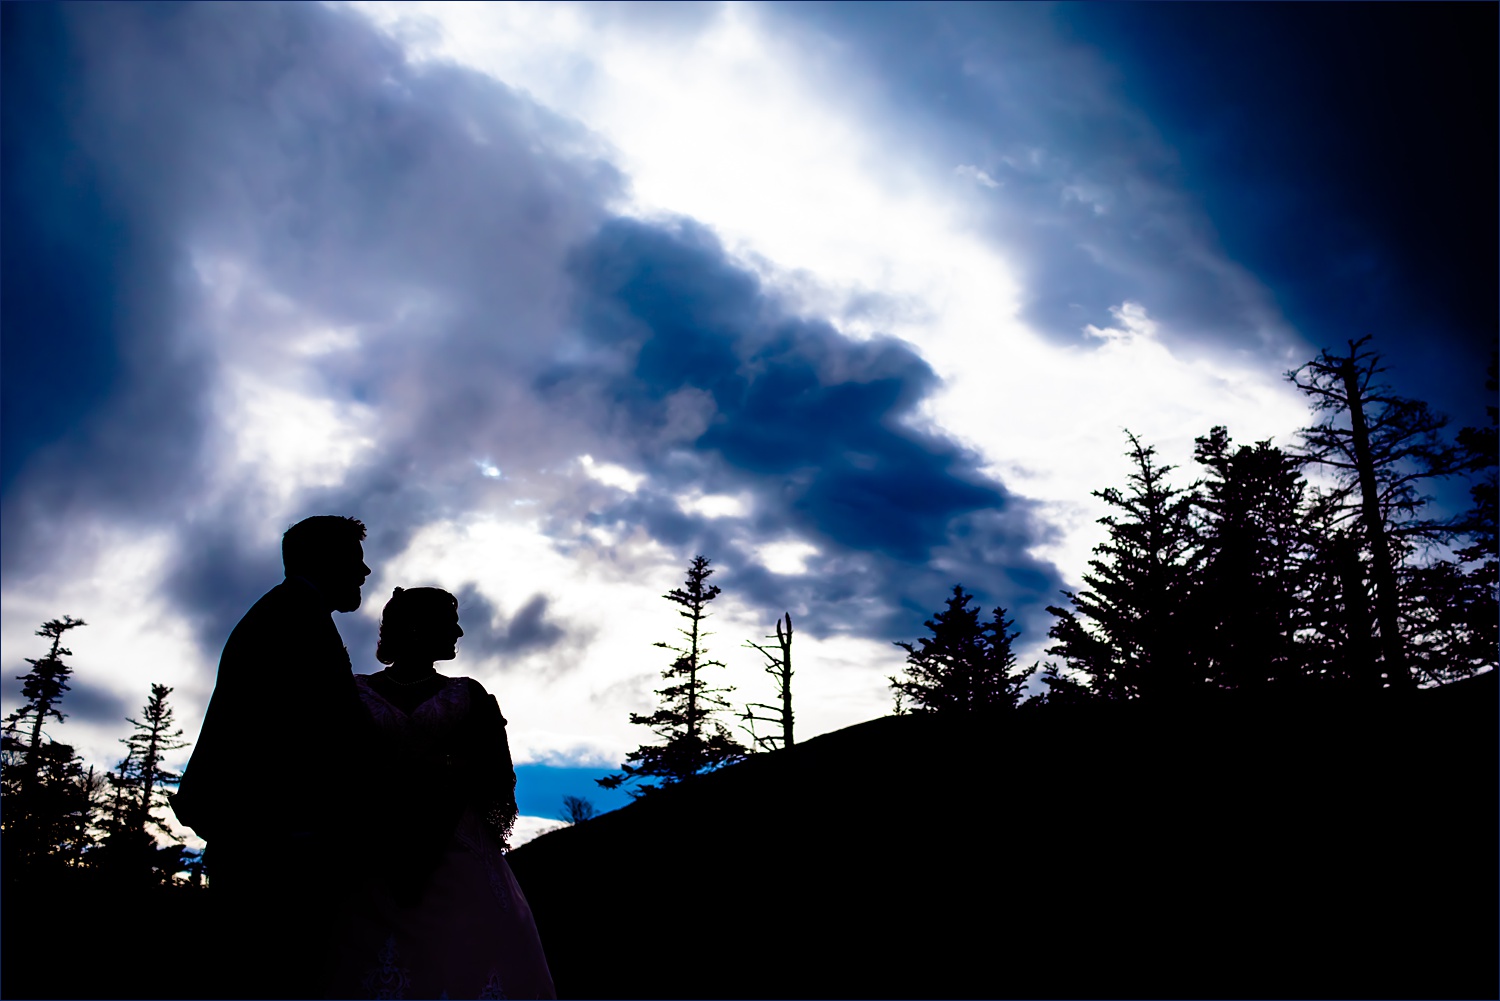 The bride and groom silhouetted against the White Mountains on the New Hampshire Elopement